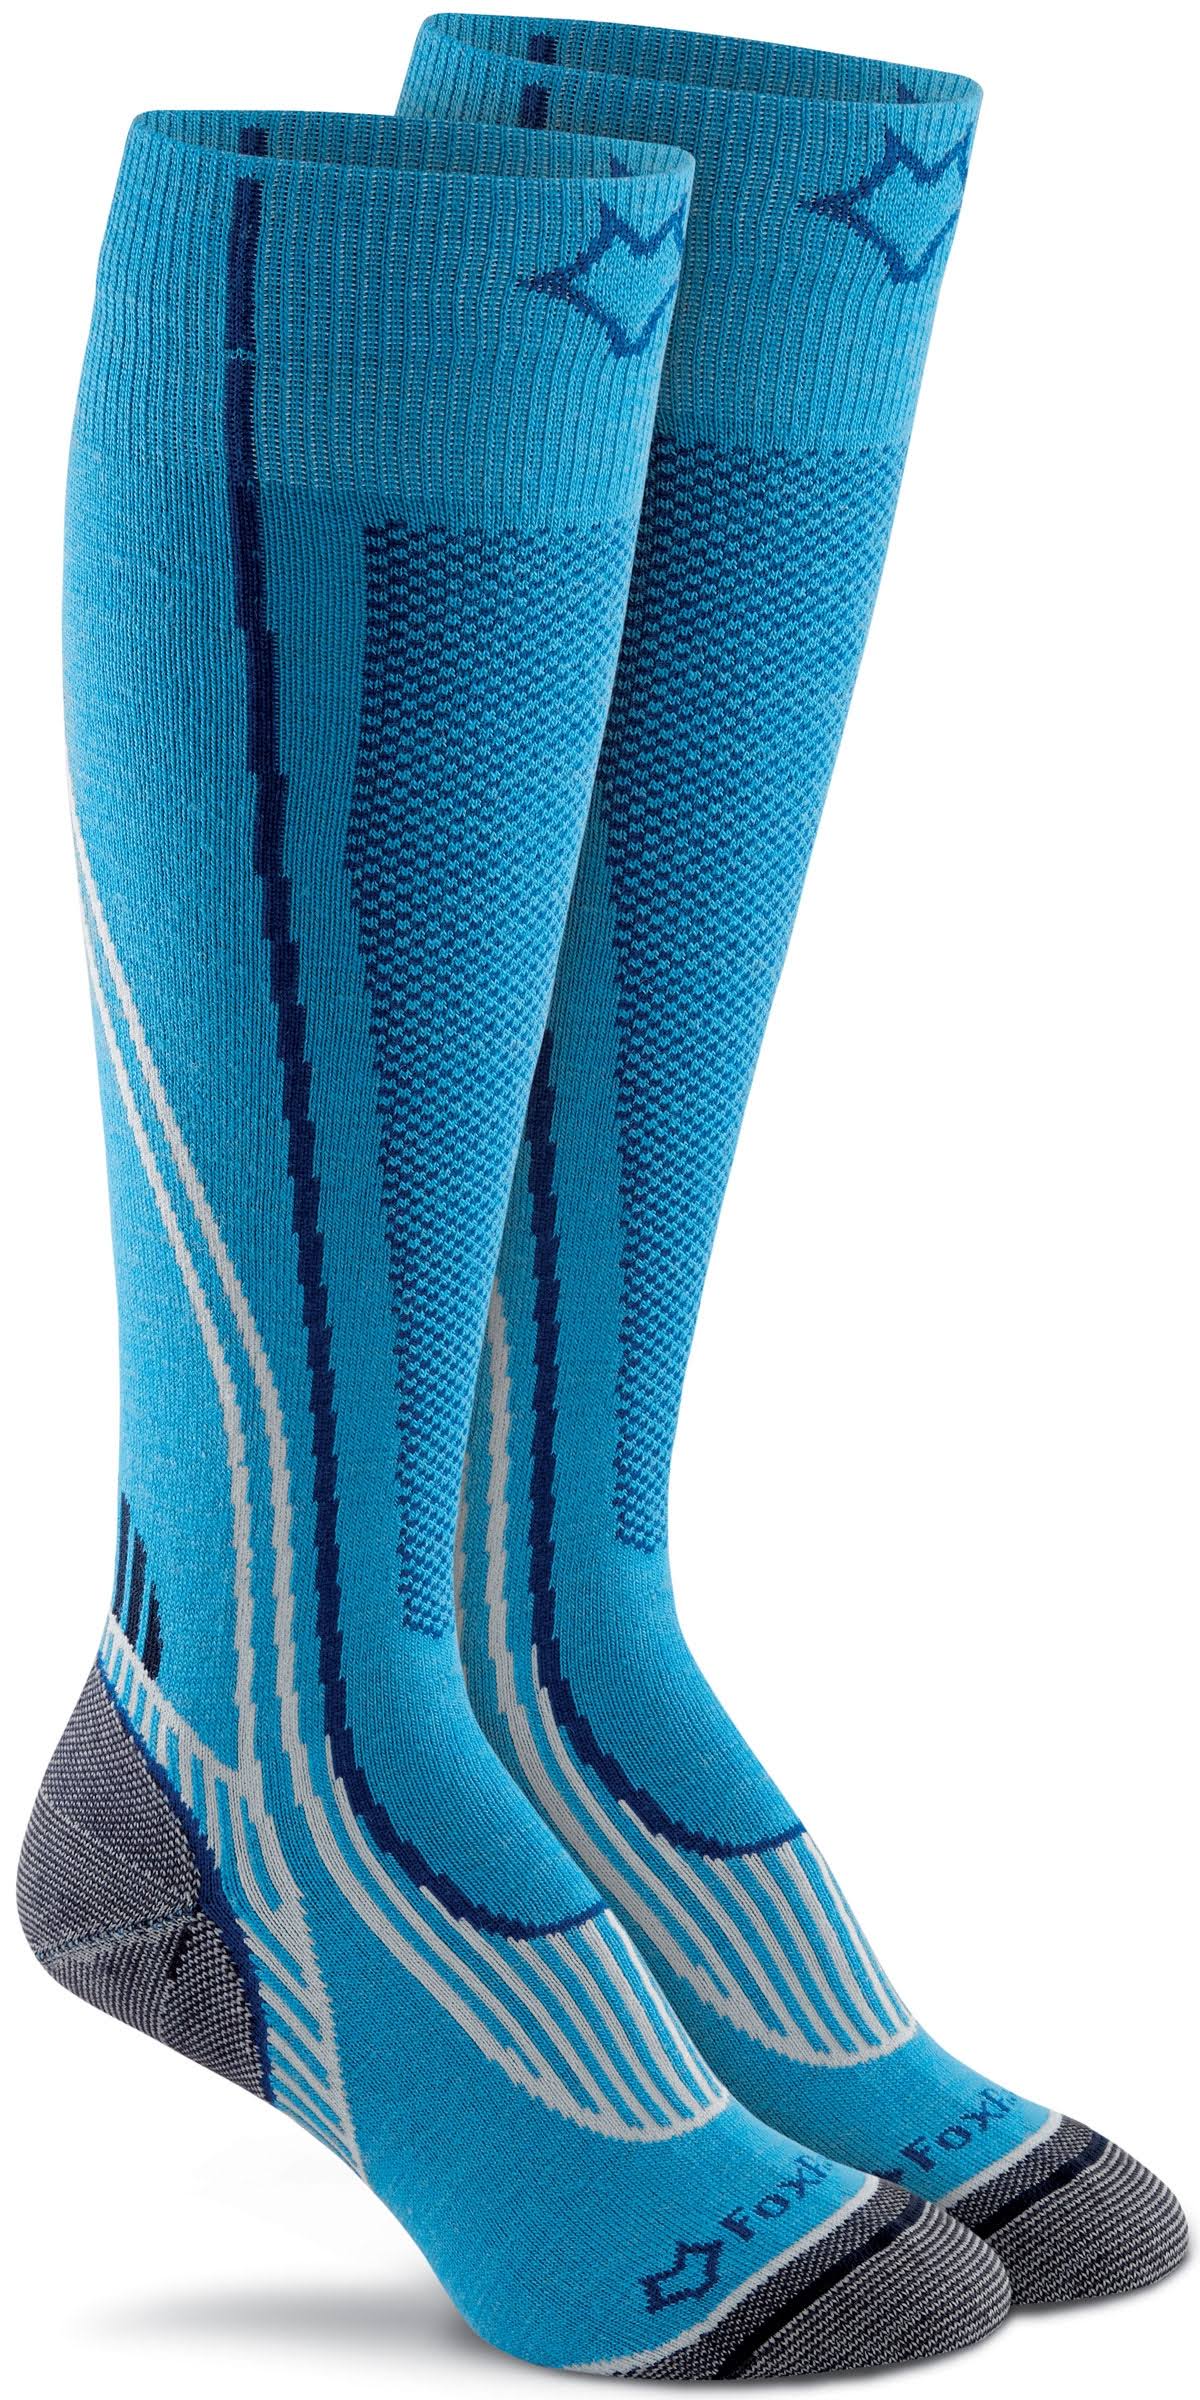 Fox River Adult Sugarloaf Lightweight Over-the-Calf Sock